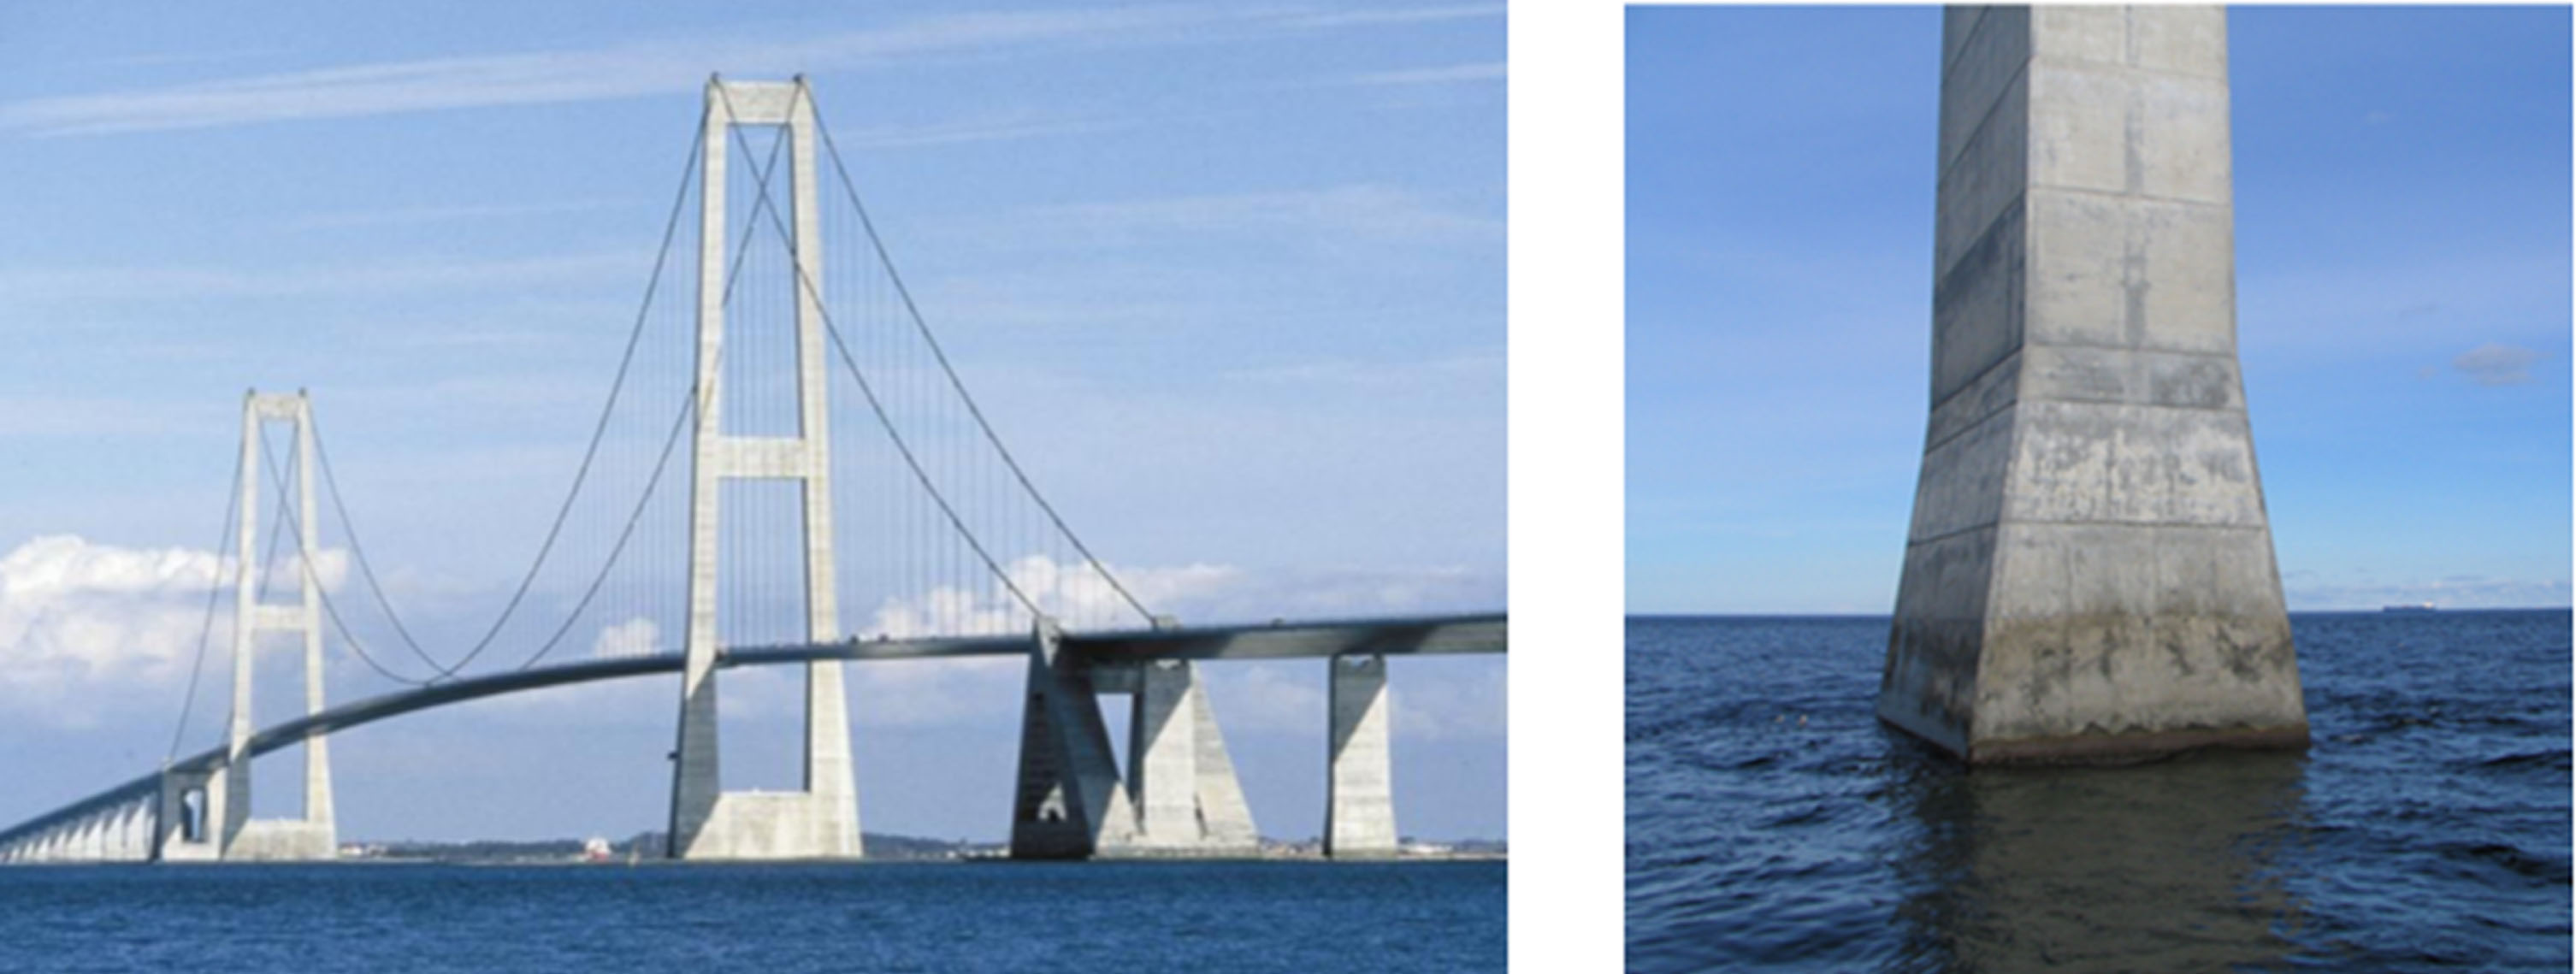 The Great Belt Link's suspension bridge and one of its piers selected for testing for service life. The pier was constructed using plywood form kept on for 2-3 days before stripping. LOK-TEST performed met the requirements.